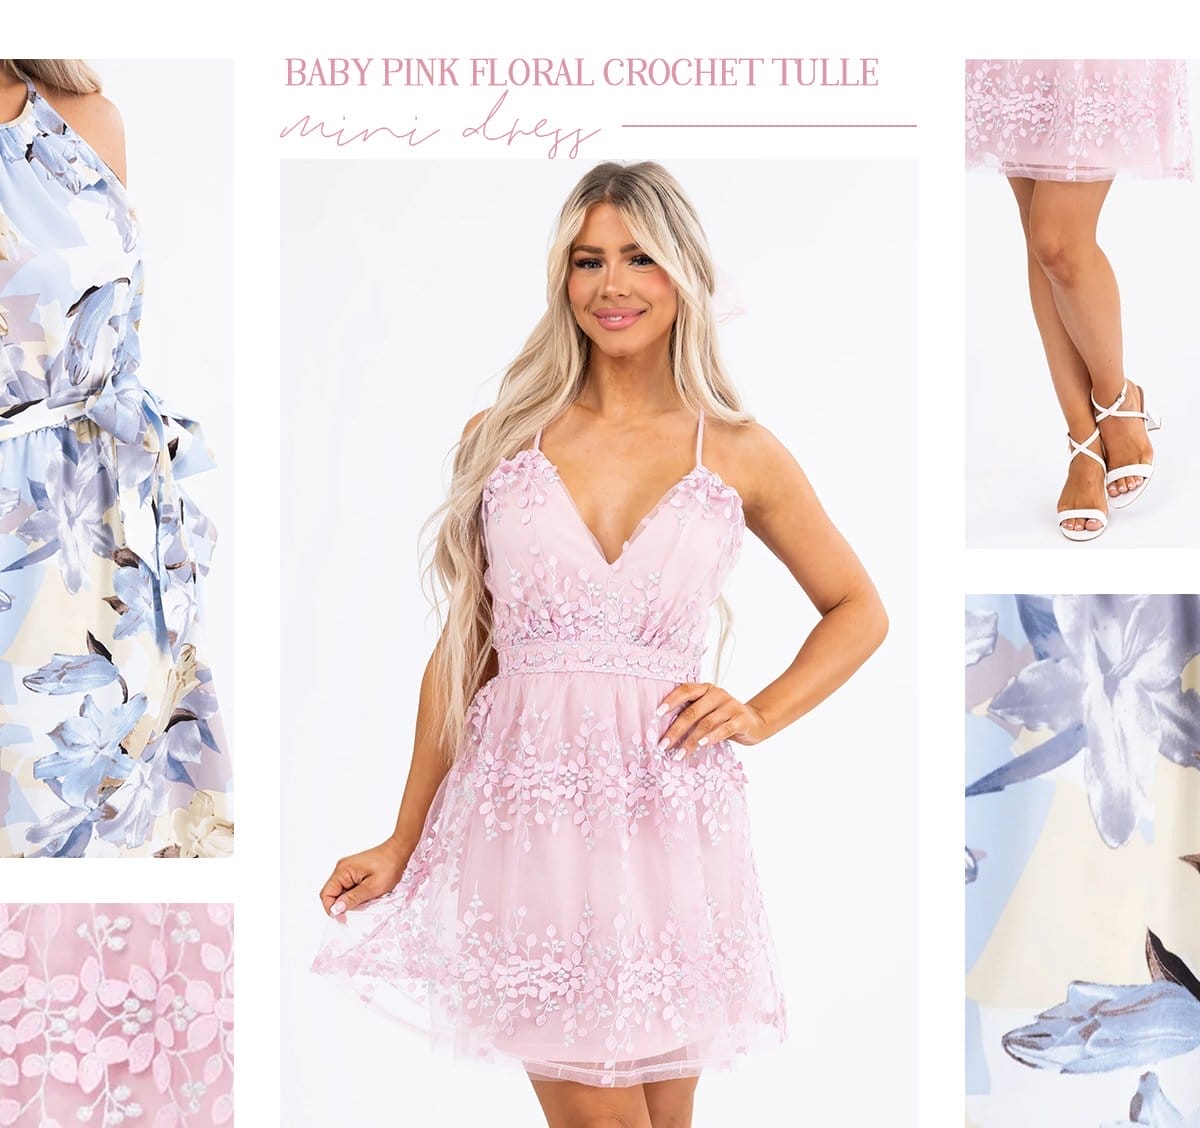 Baby Pink Floral Crochet Tulle Mini Dress